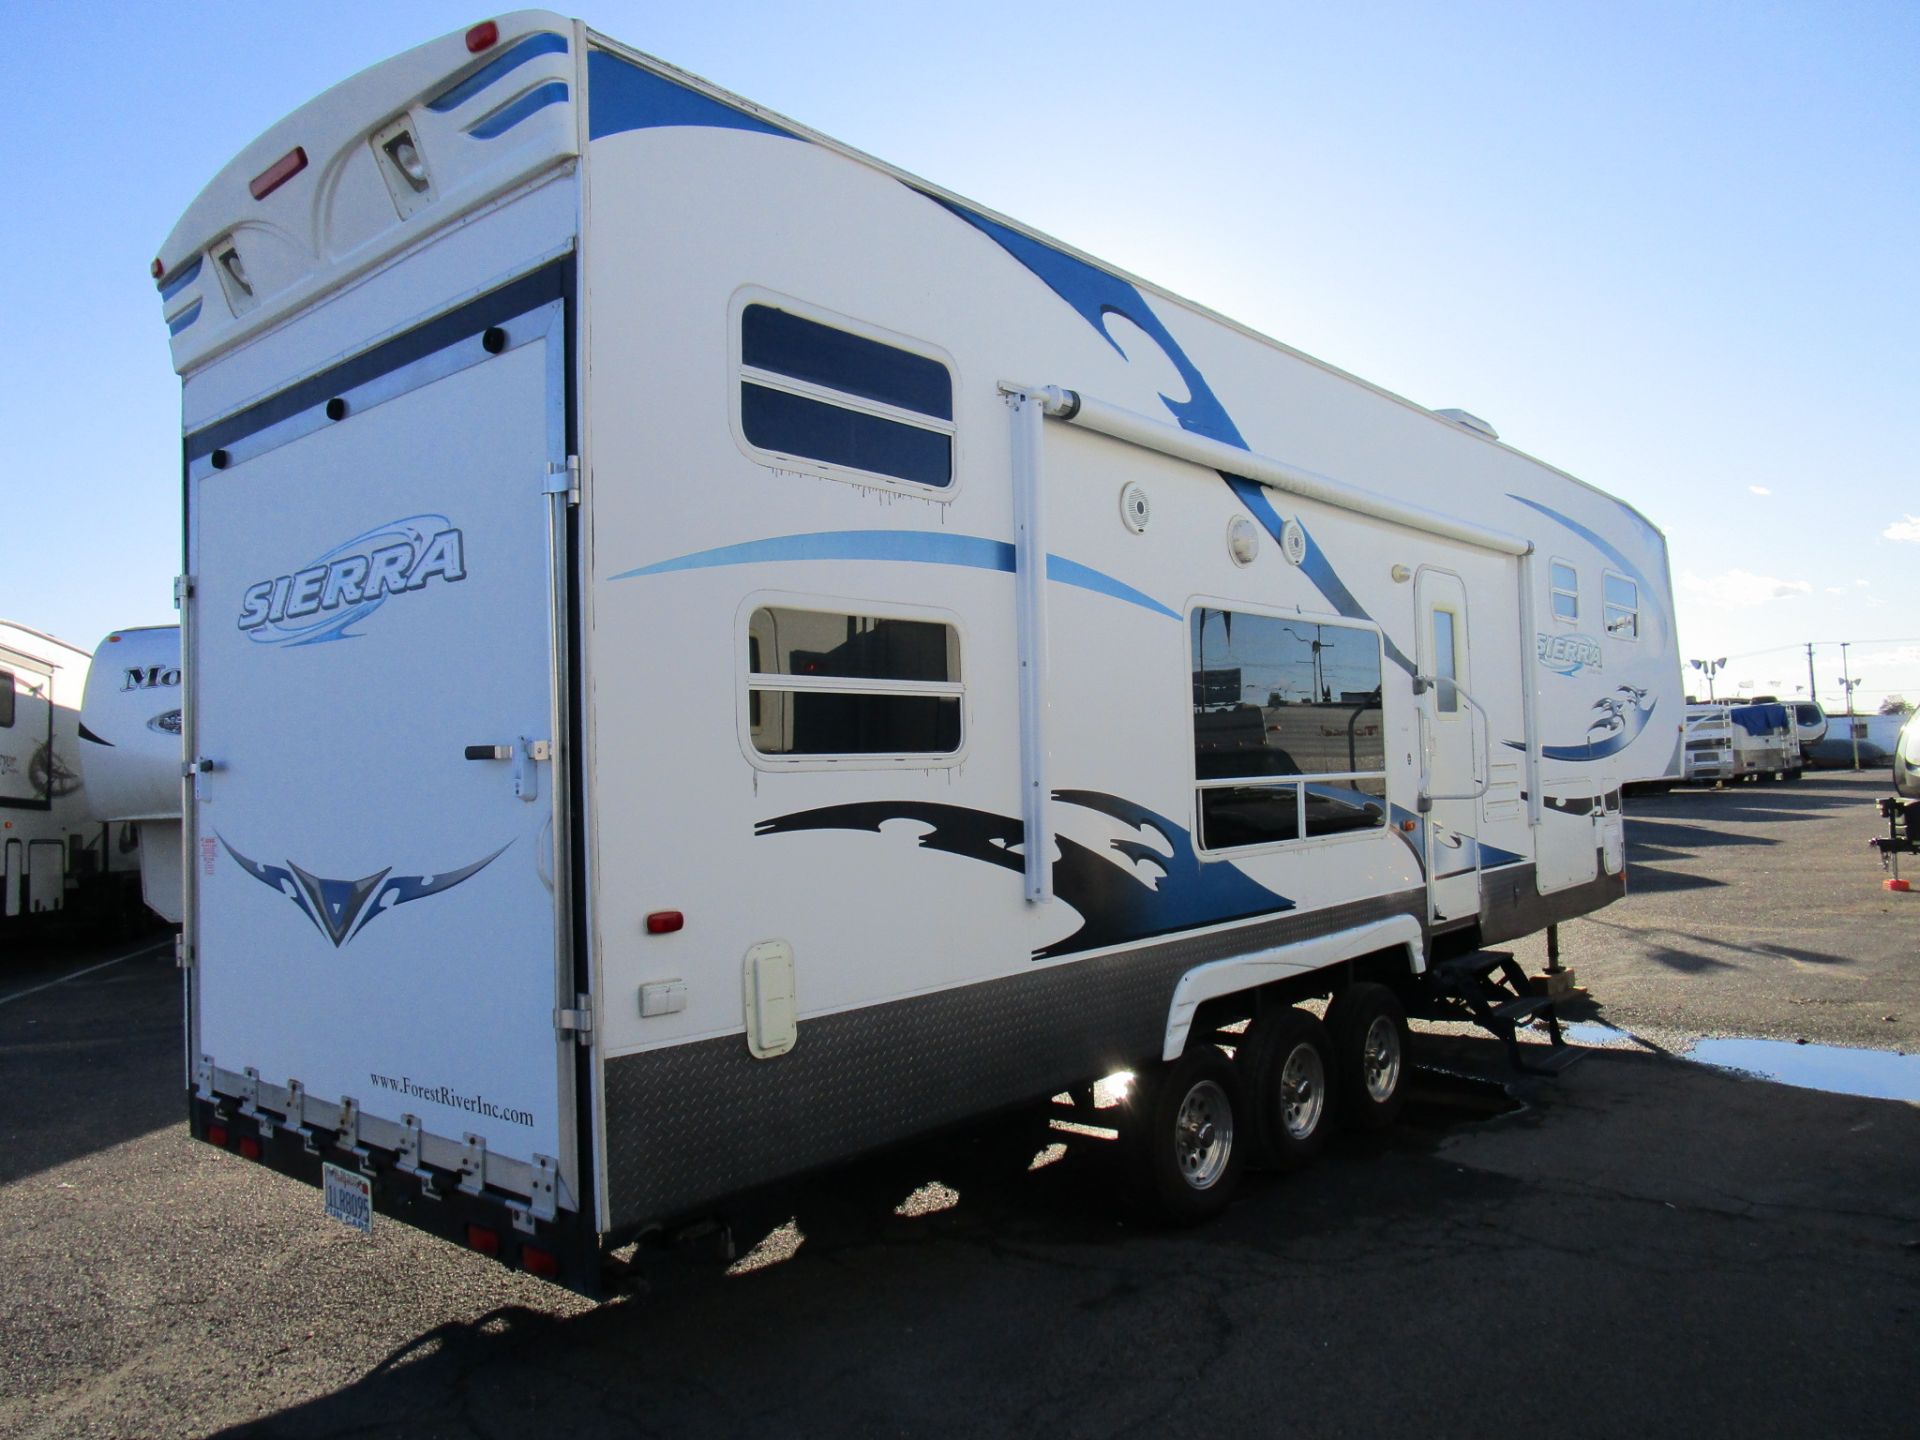 RV for sale: 2008 Forest River Sierra 5th Wheel Toy Hauler 34' in Lodi 2008 Forest River Sierra Toy Hauler